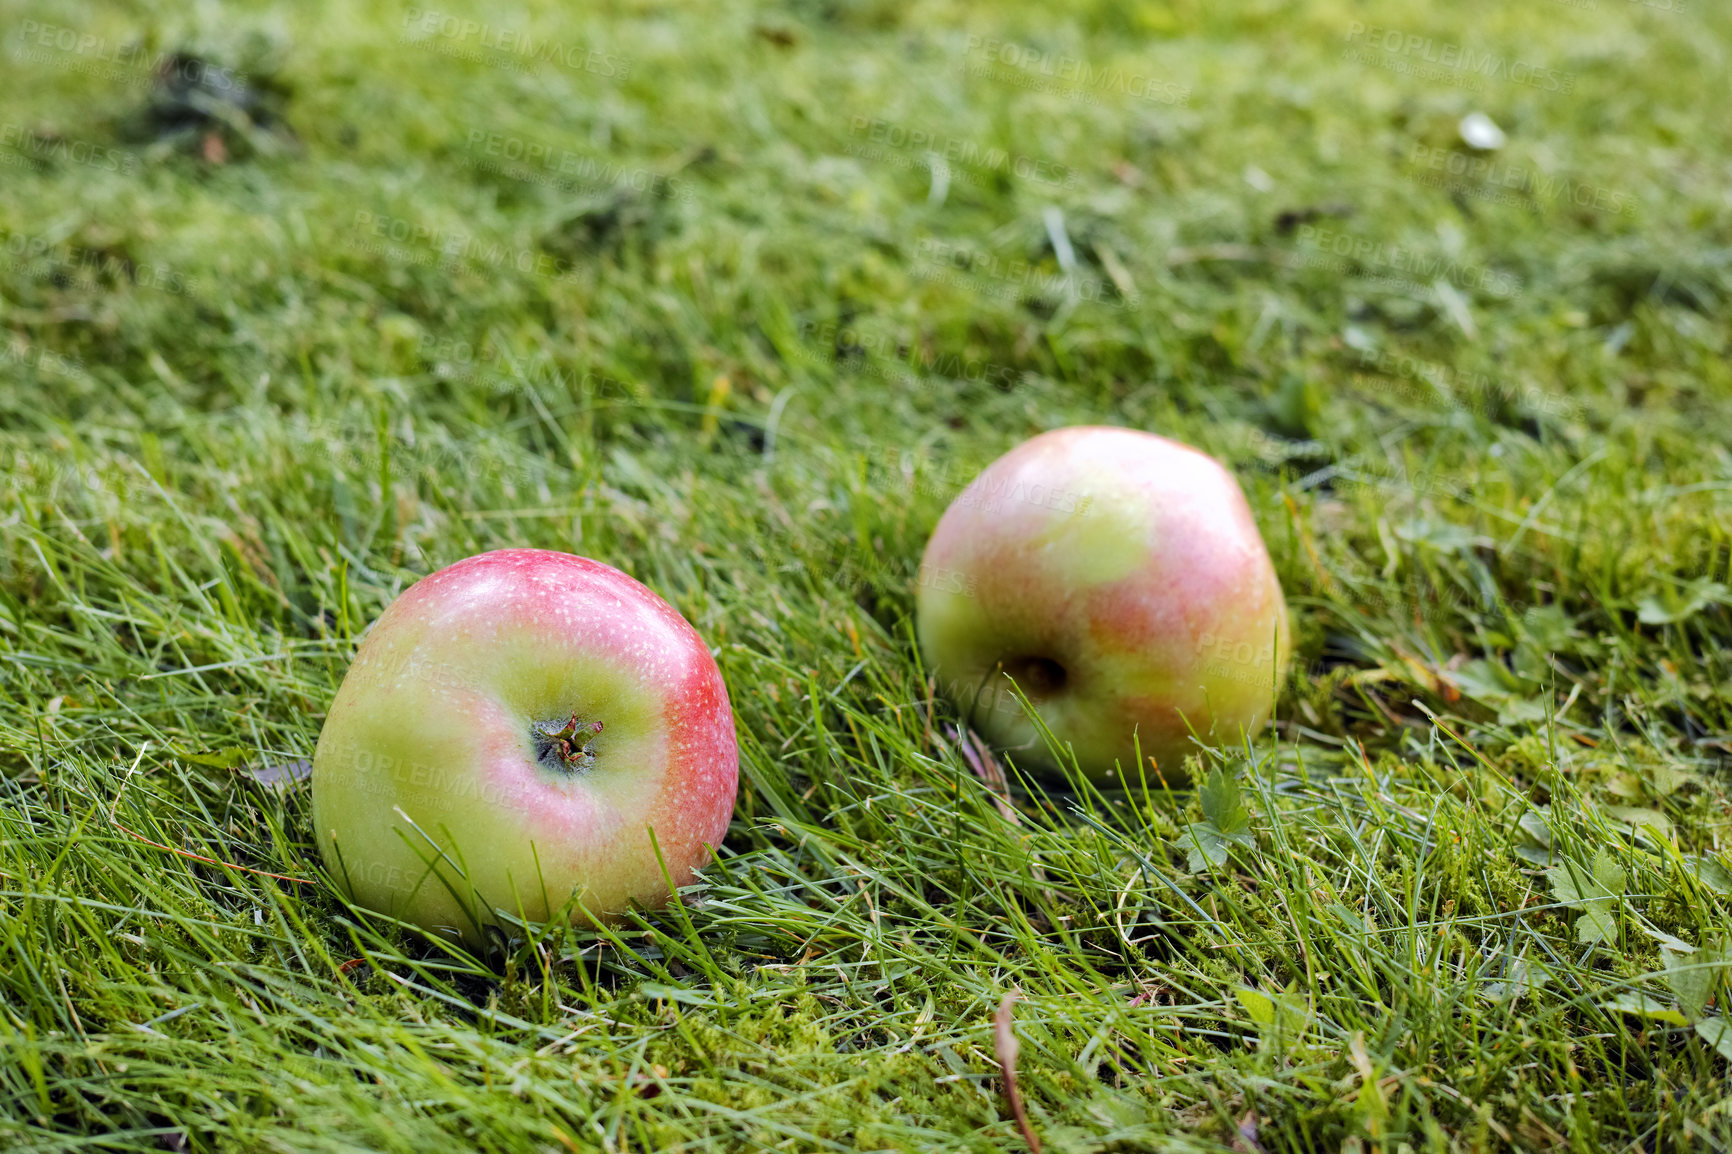 Buy stock photo Healthy agricultural vegan organic fruit or produce, ripe and ready for the harvest season on a grassy meadow. Closeup of two fallen apples lying in the grass on the field of a sustainable farm 